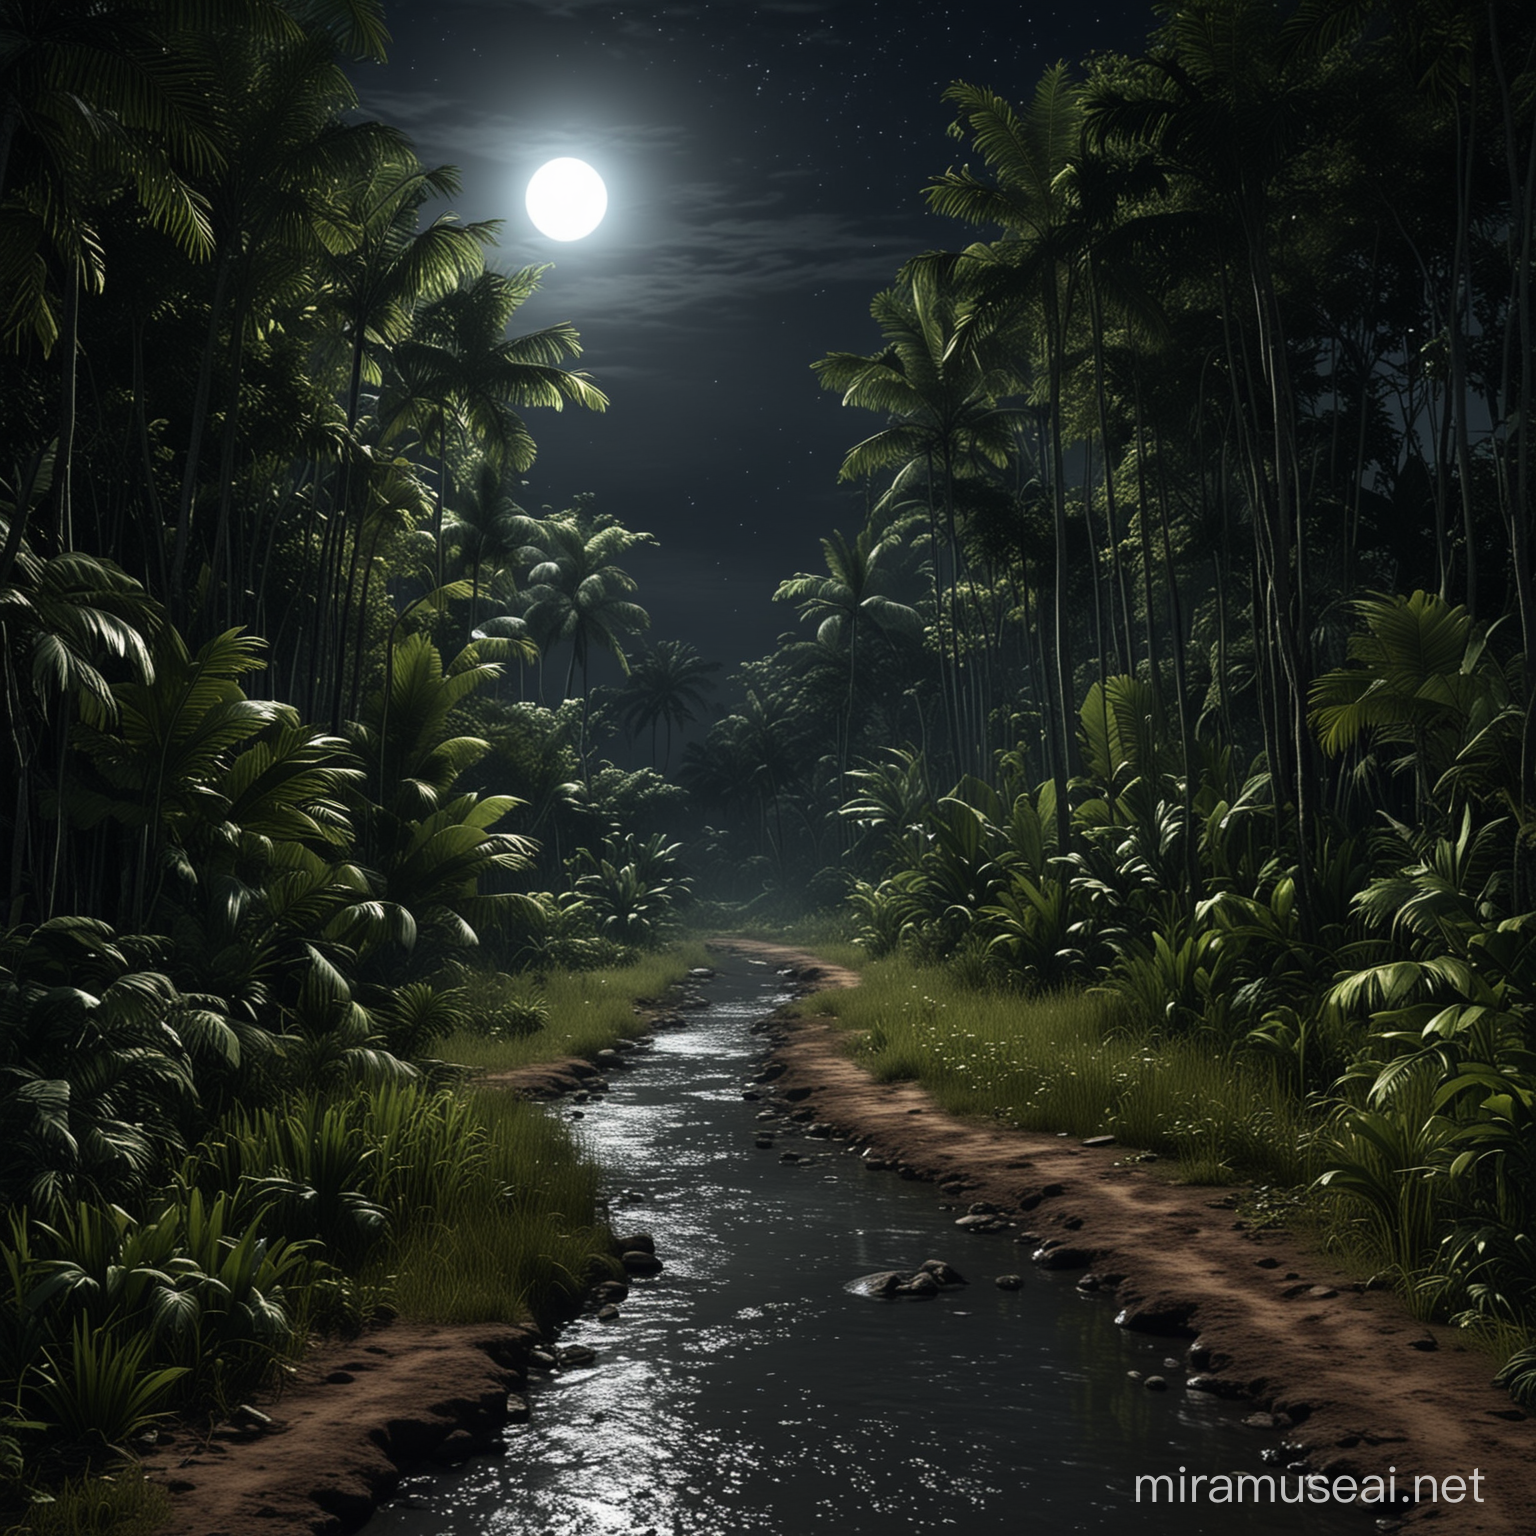 Realistic Tropical Jungle Night Scene with Moonlit Dirt Road